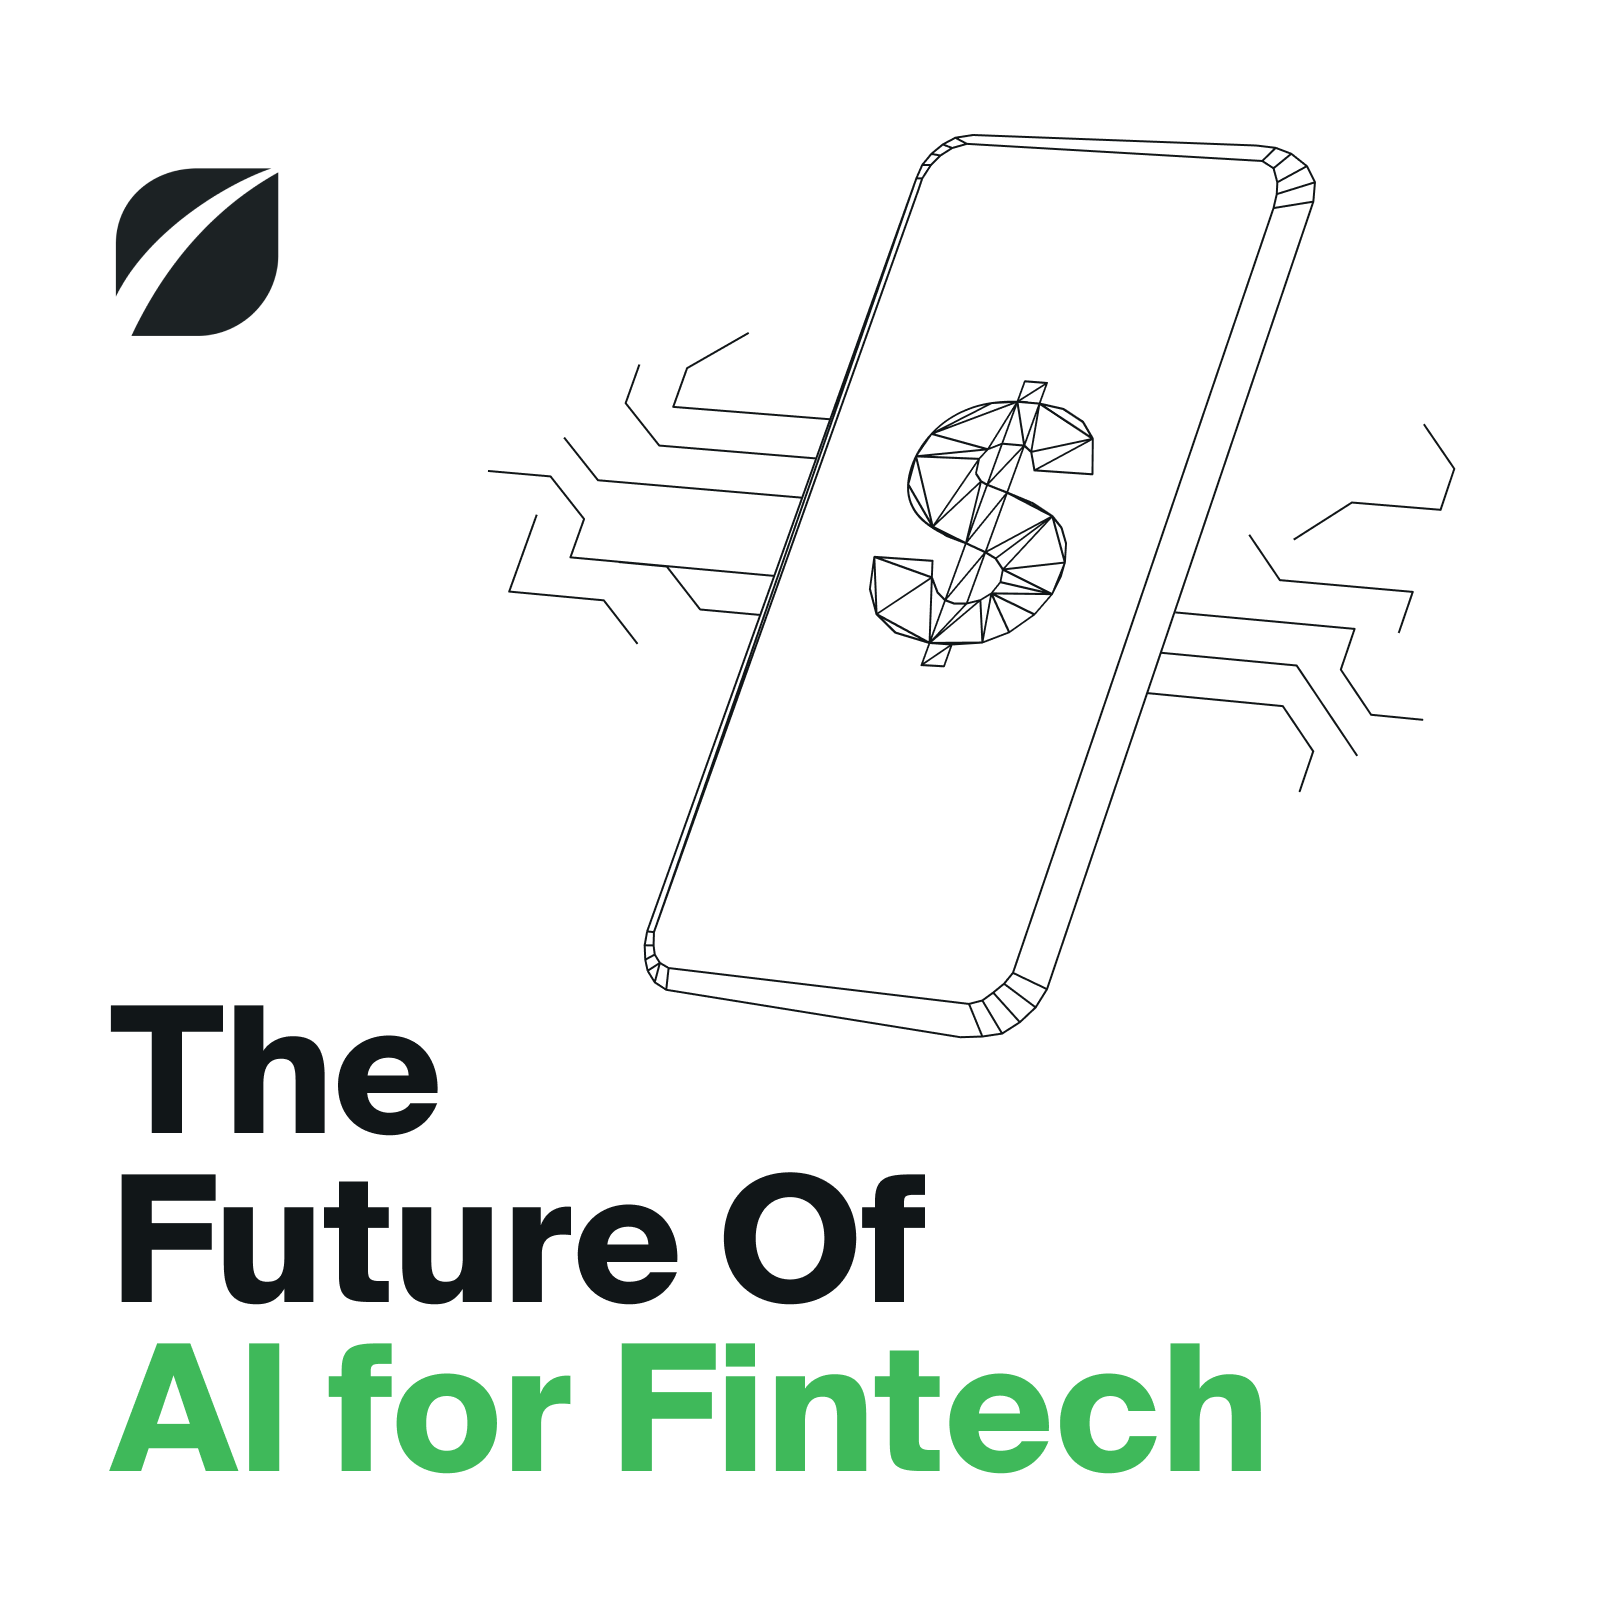 The Future Of AI for Fintech